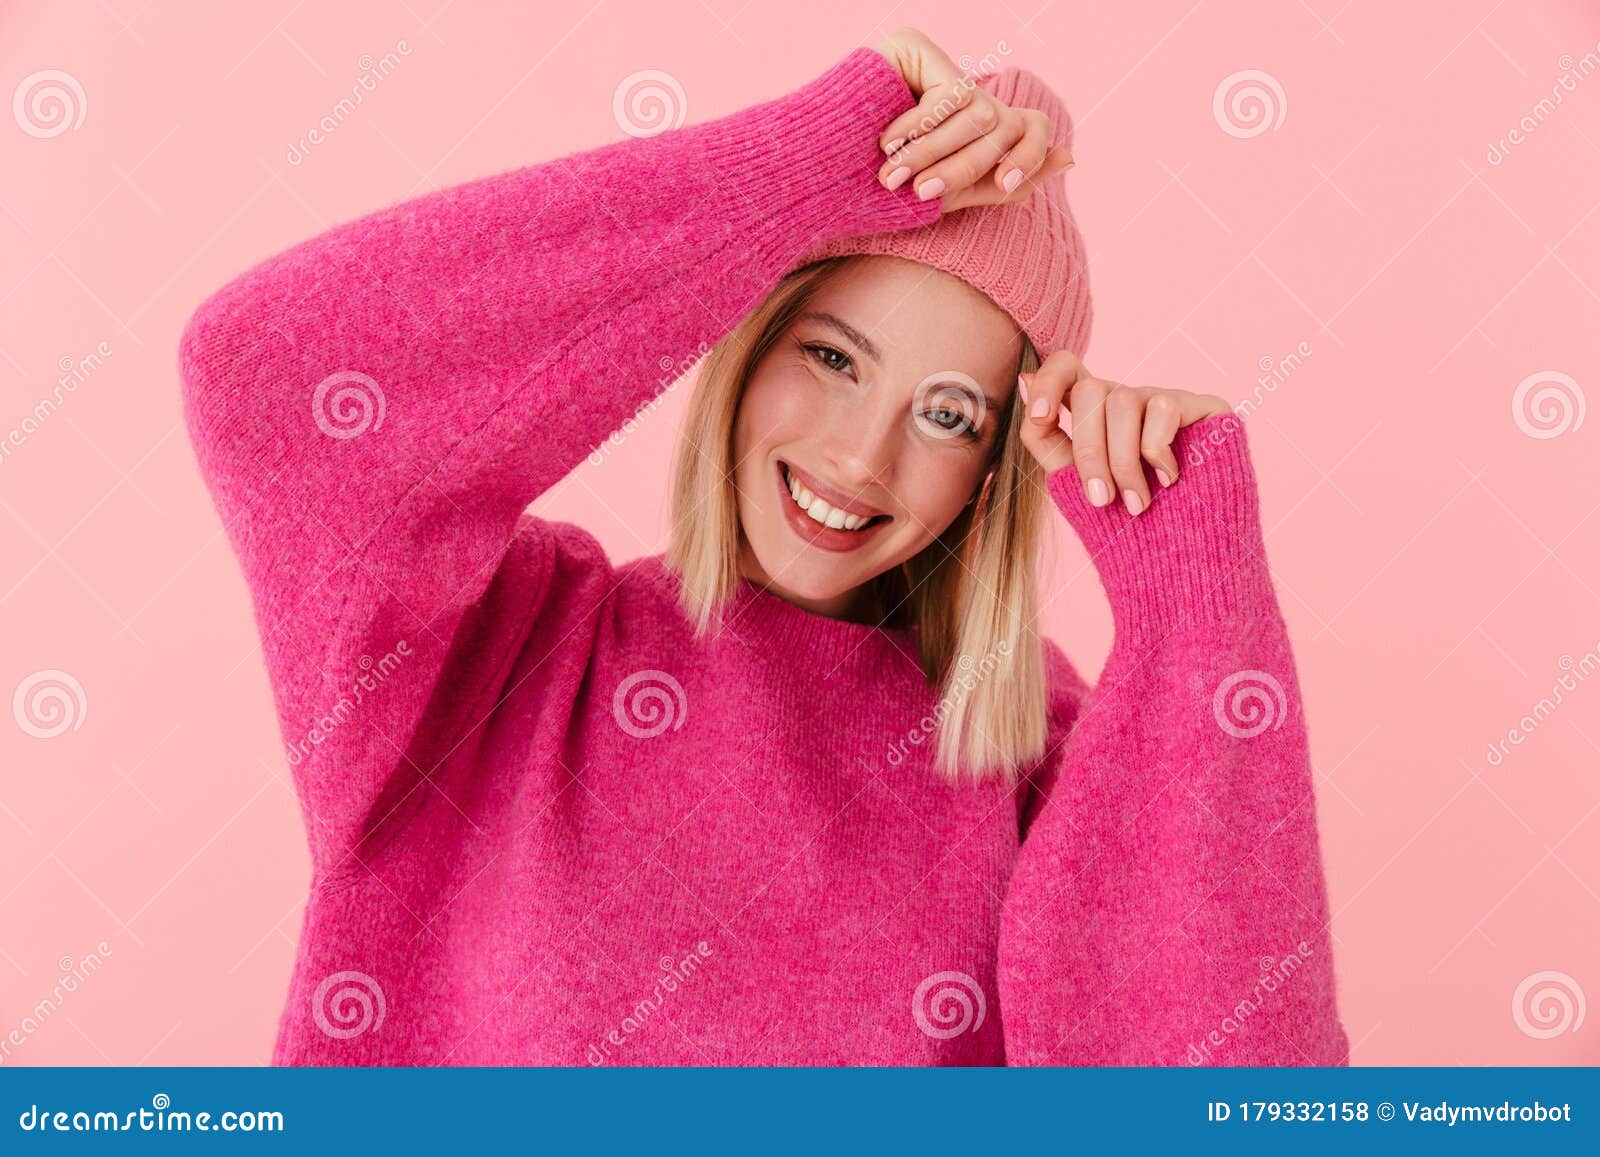 Image of Positive Beautiful Blonde Girl Wearing Hat and Sweater Smiling ...